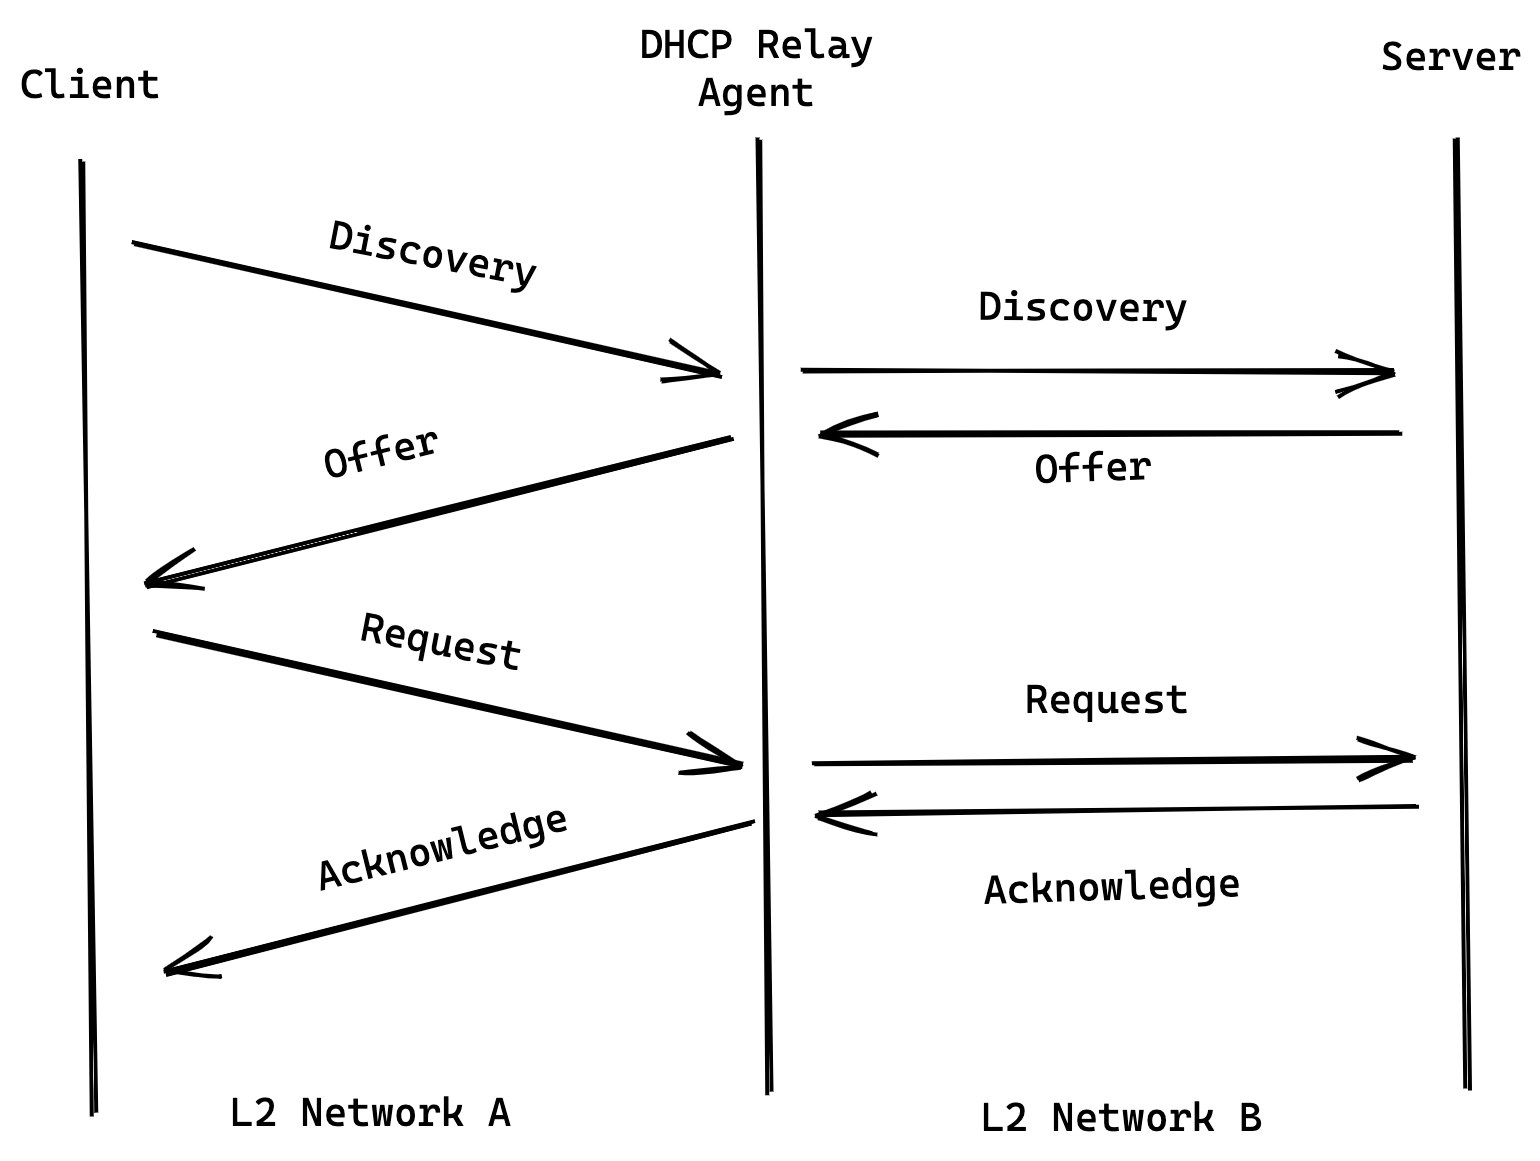 DHCP relay workflow